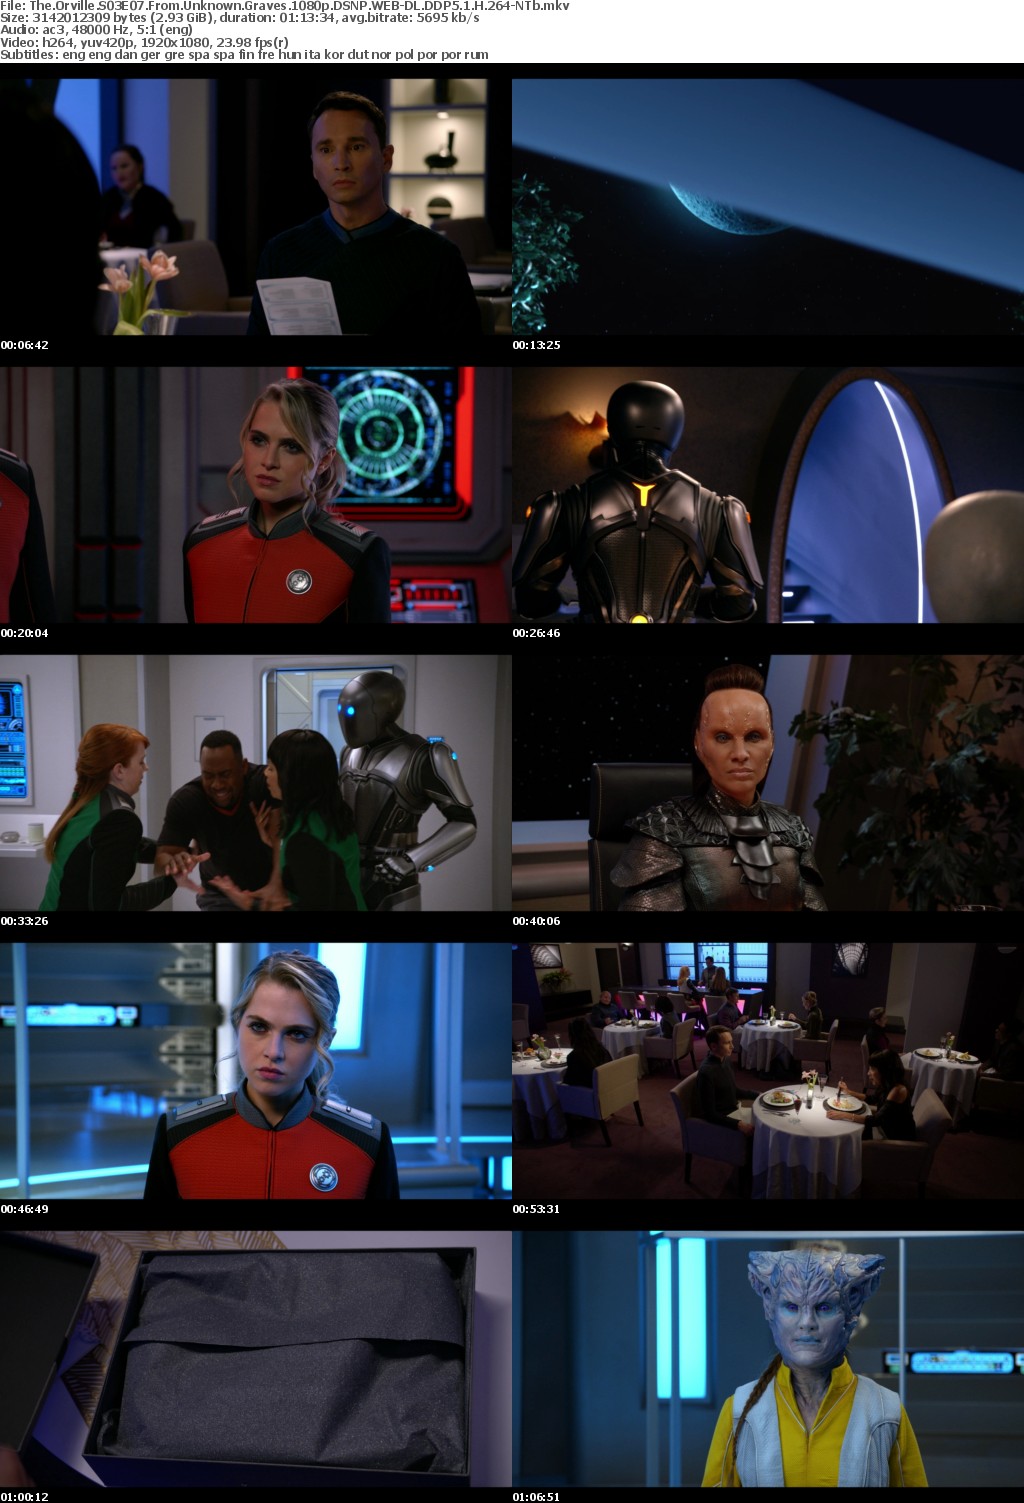 The Orville S03E07 From Unknown Graves 1080p DSNP WEBRip DDP5 1 x264-NTb